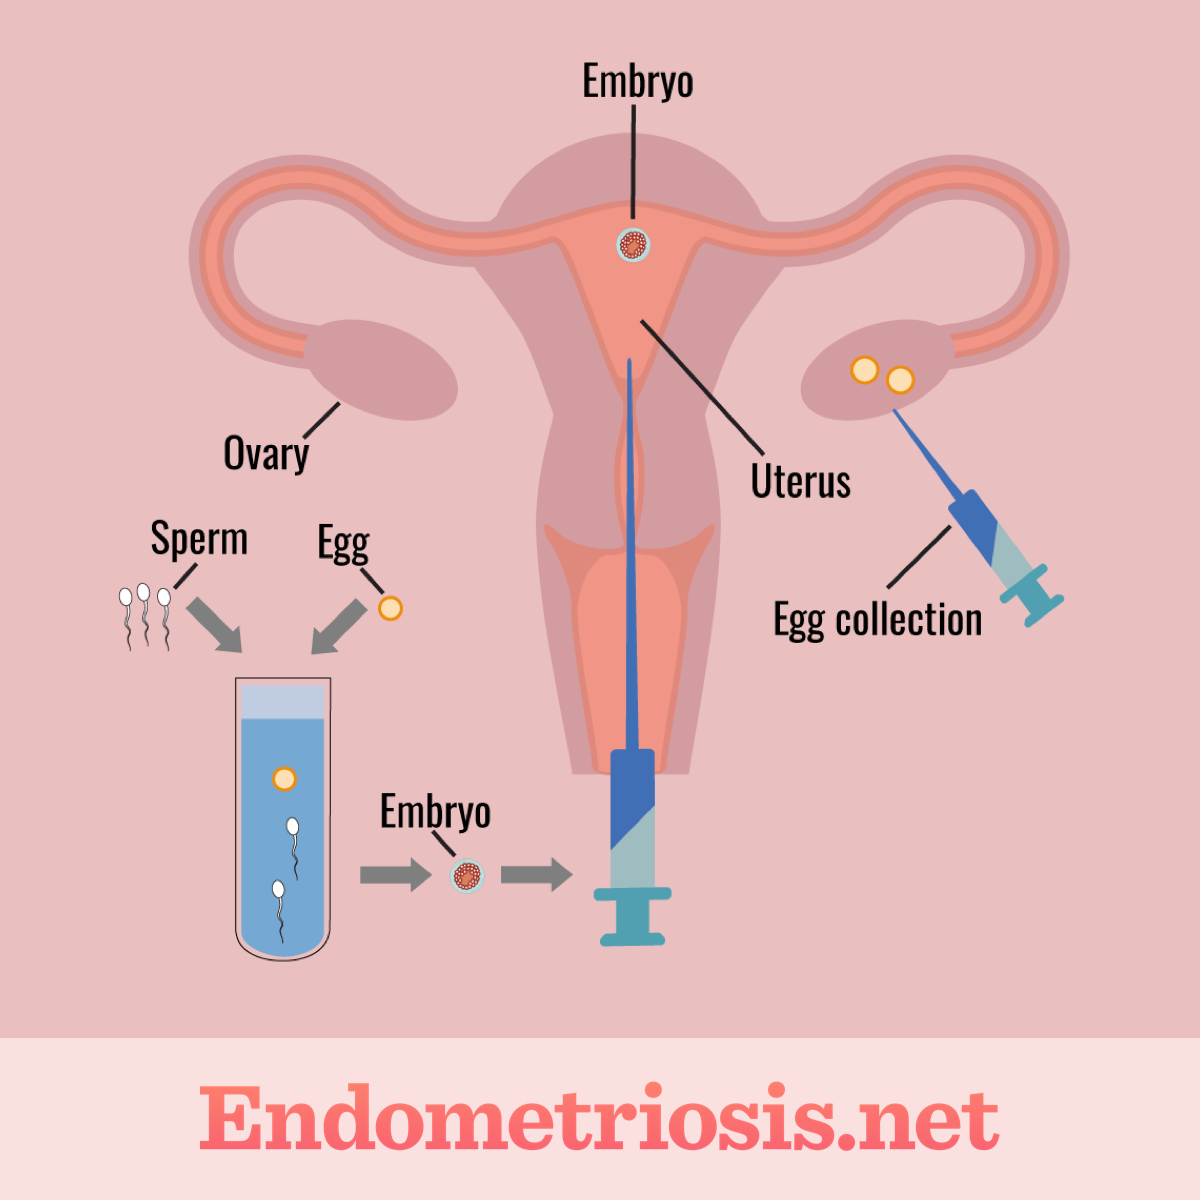 Egg retrieval from ovary using syringe and combining egg and sperm in a tube to create embryo transporting embryo back to uterus using large syringe